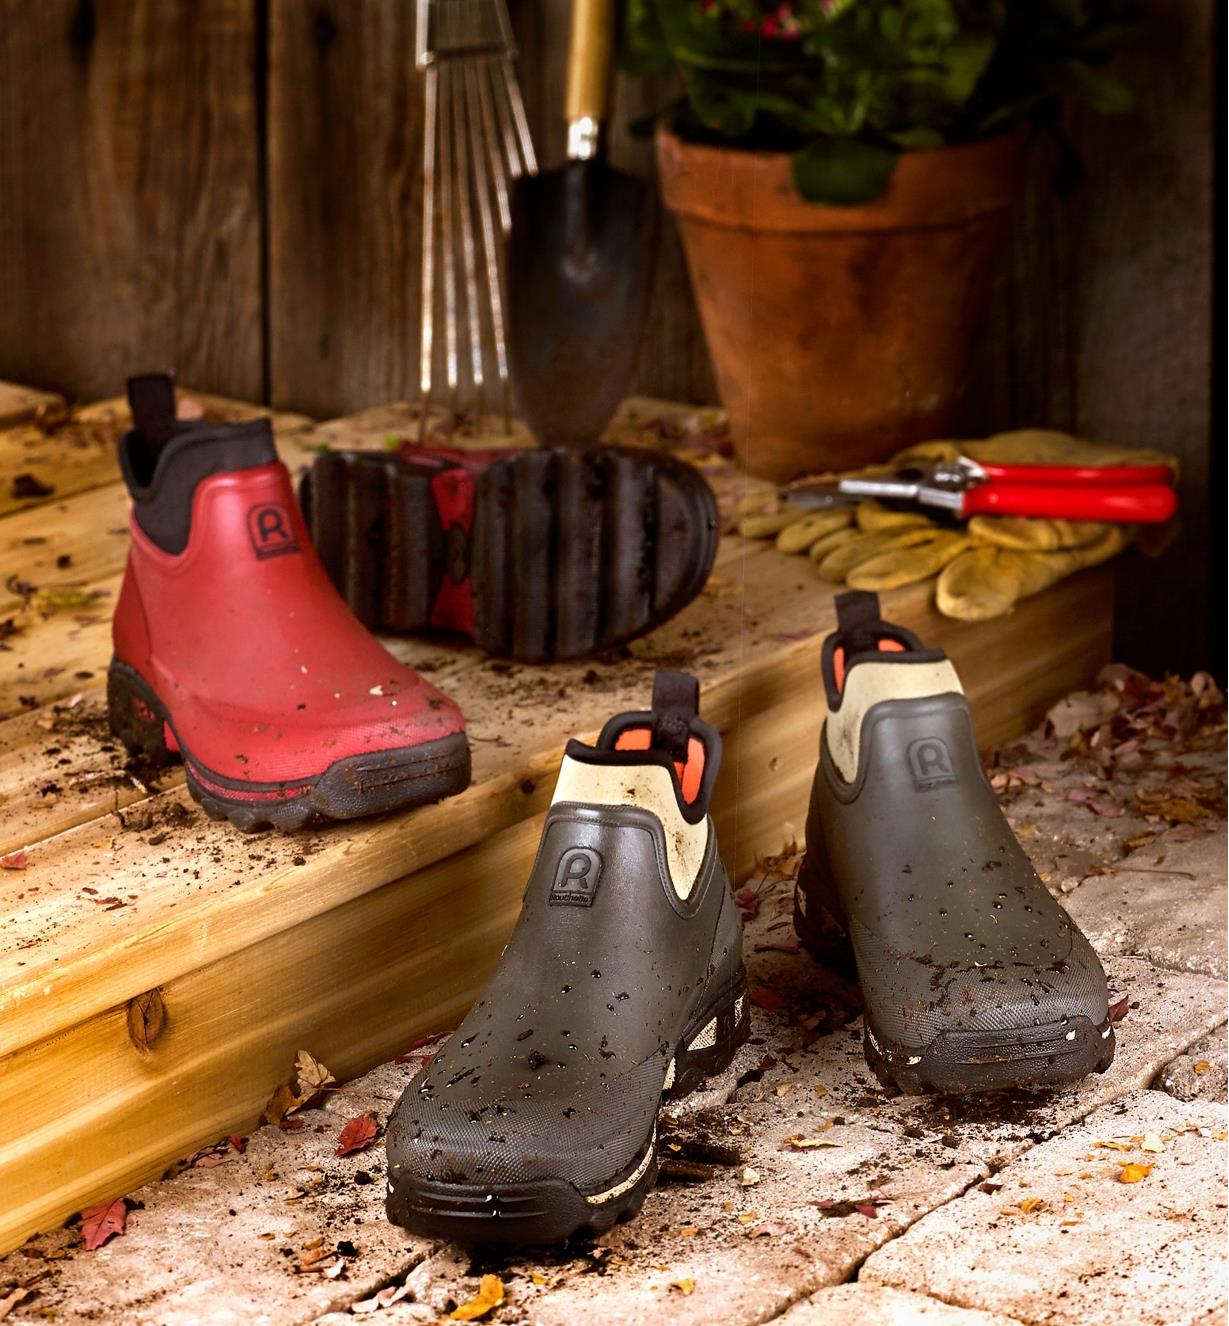 Pair of red and pair of green Gardener's Shoes sitting on a doorstep with garden tools and gloves.